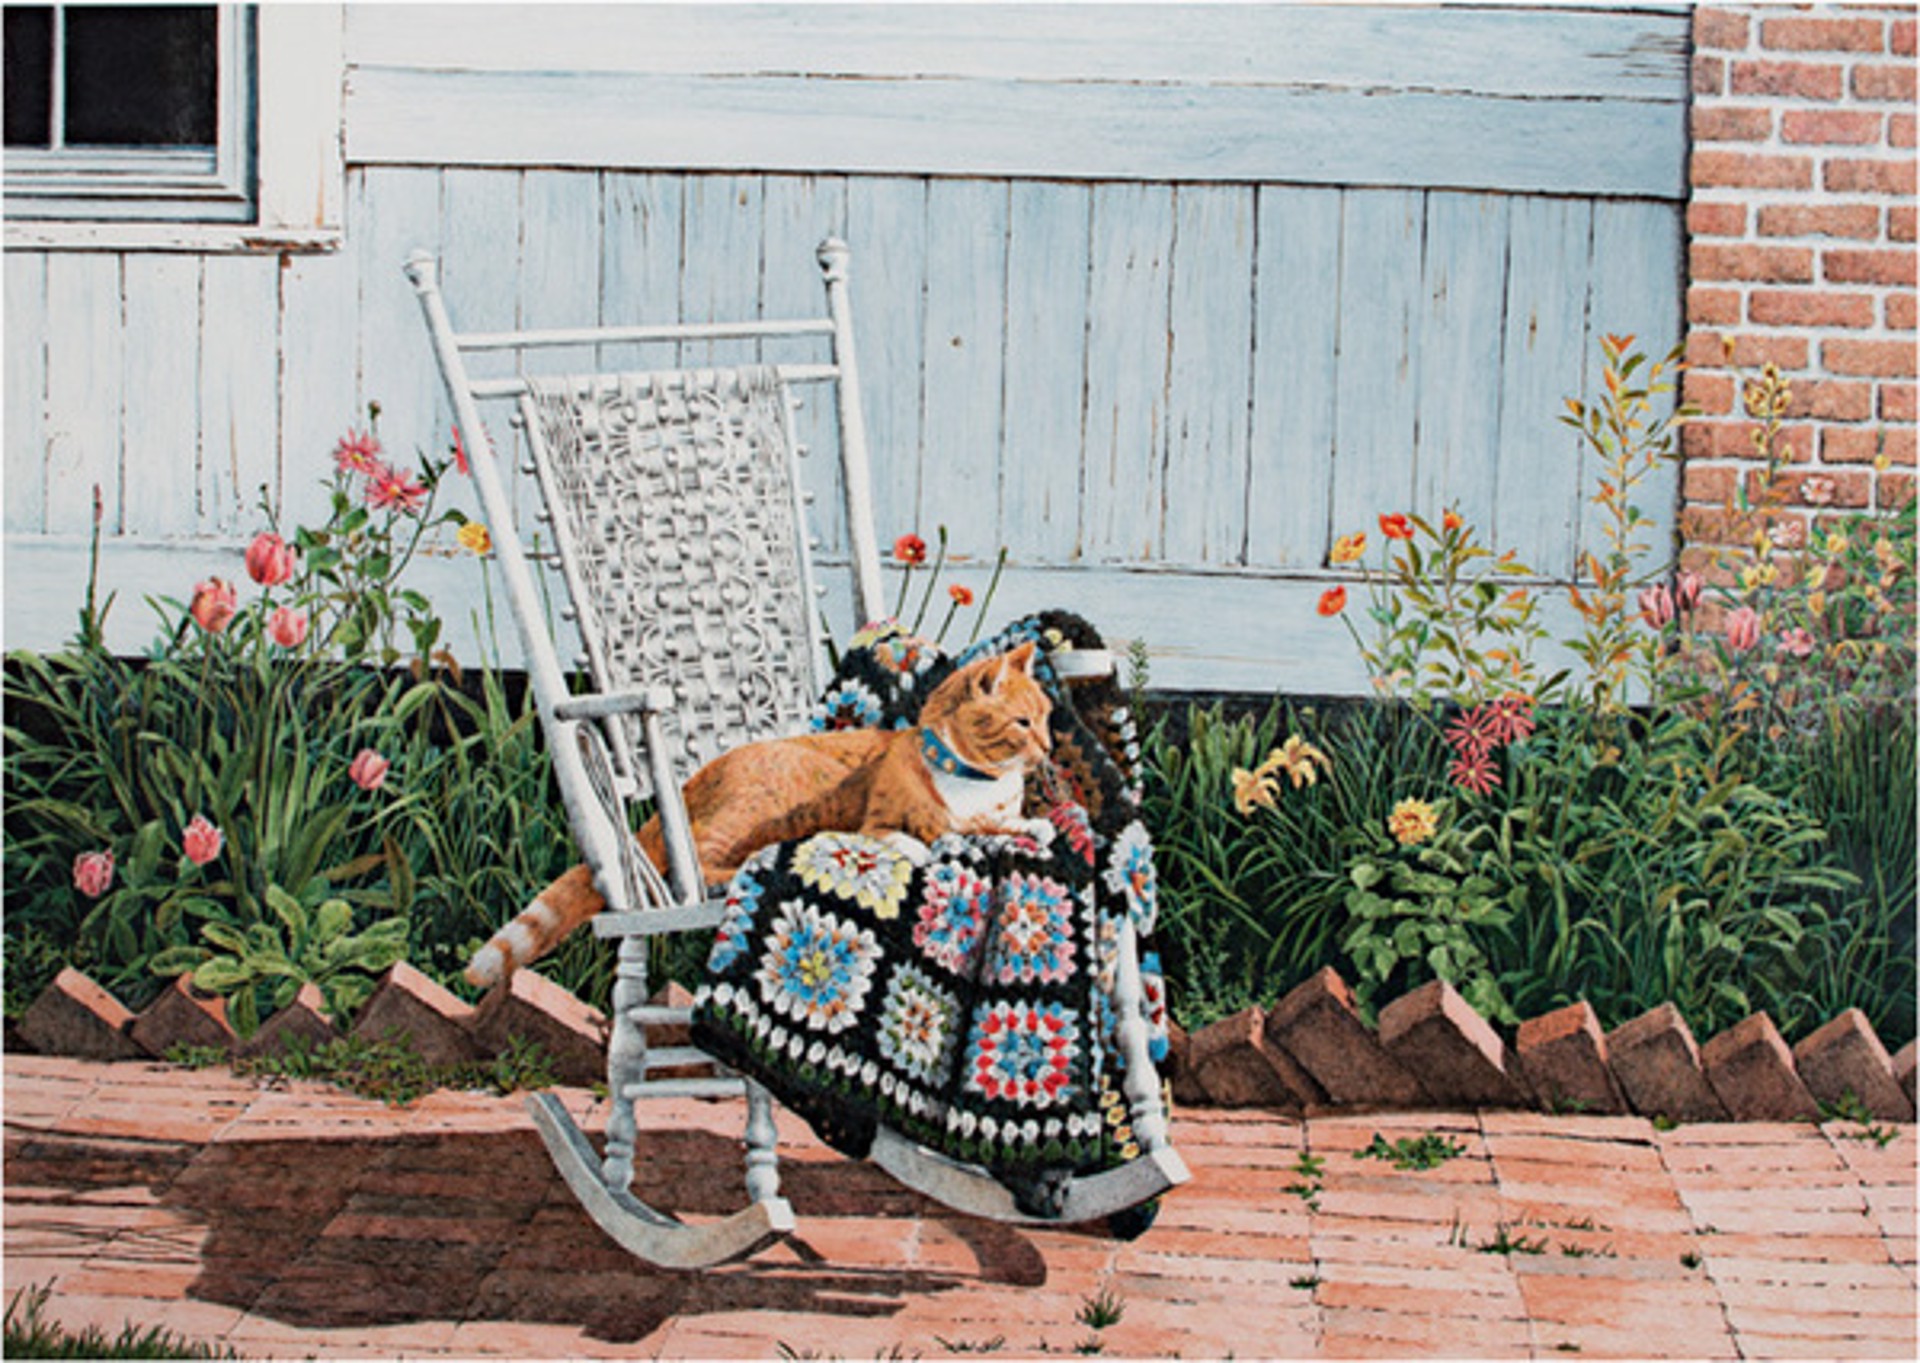 In the Rocking Chair by Helen Rundell